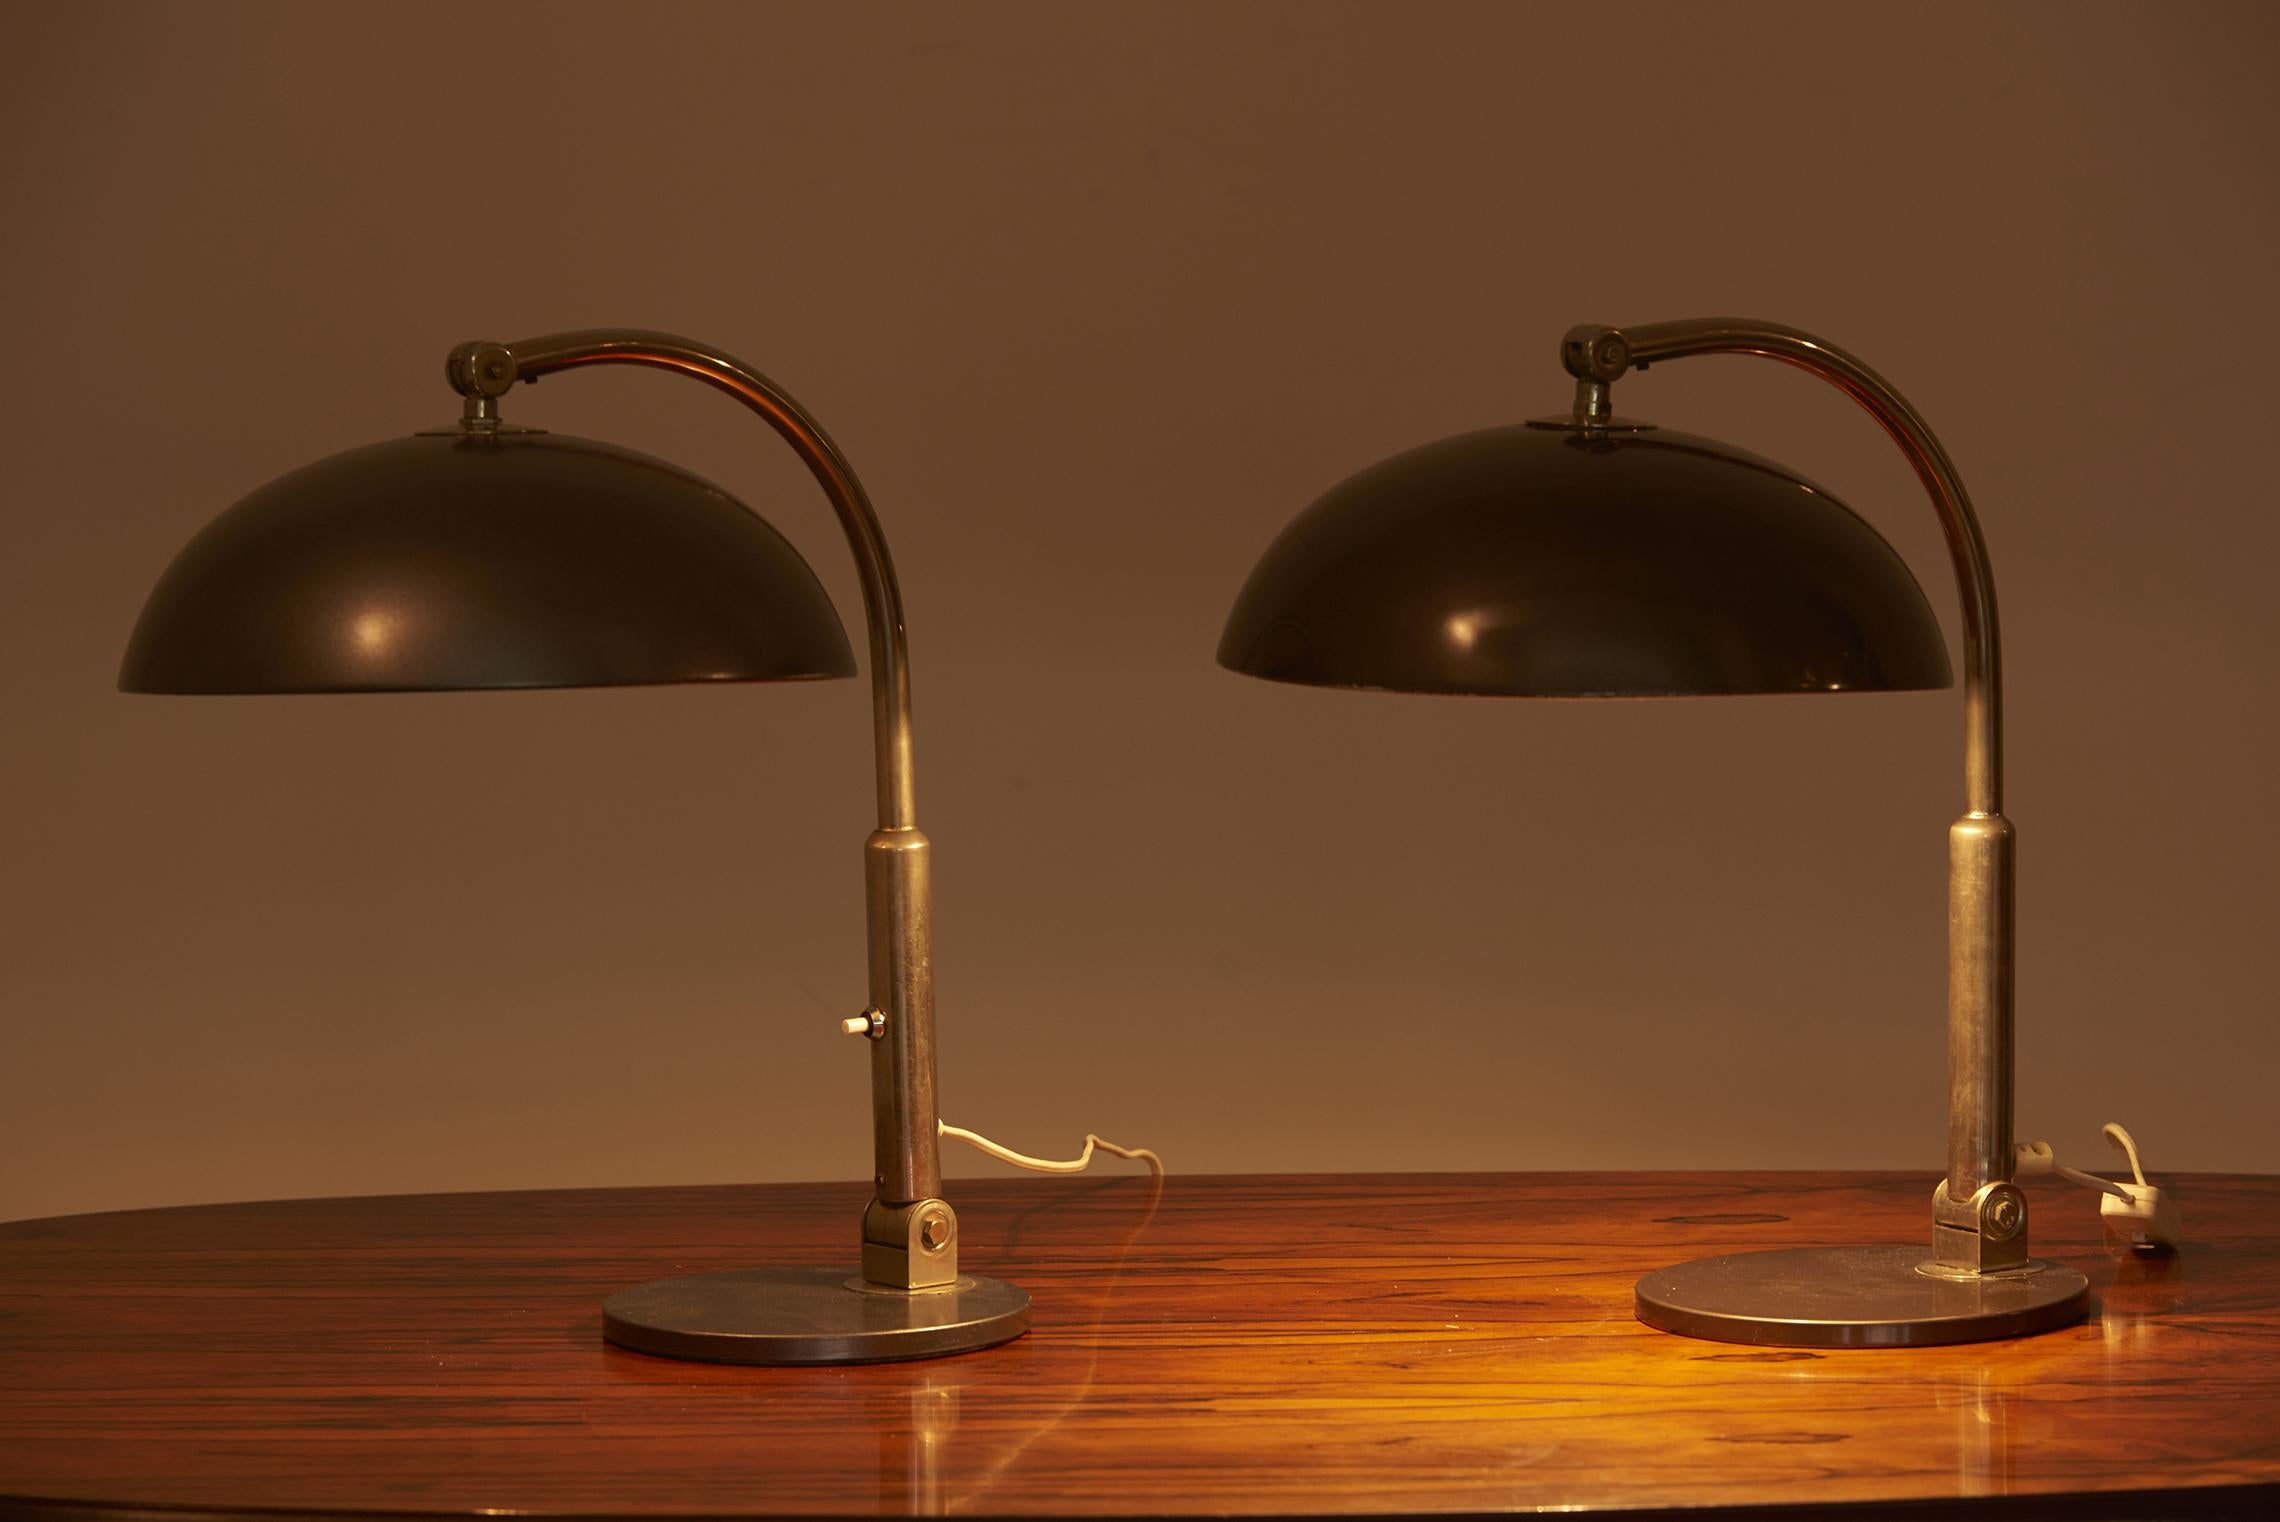 Pair of table lamps in painted and polished steel, 1950-1960s. The measurements apply to the lamp with the shade. Please note: Lamp should be fitted professionally in accordance to local requirements.